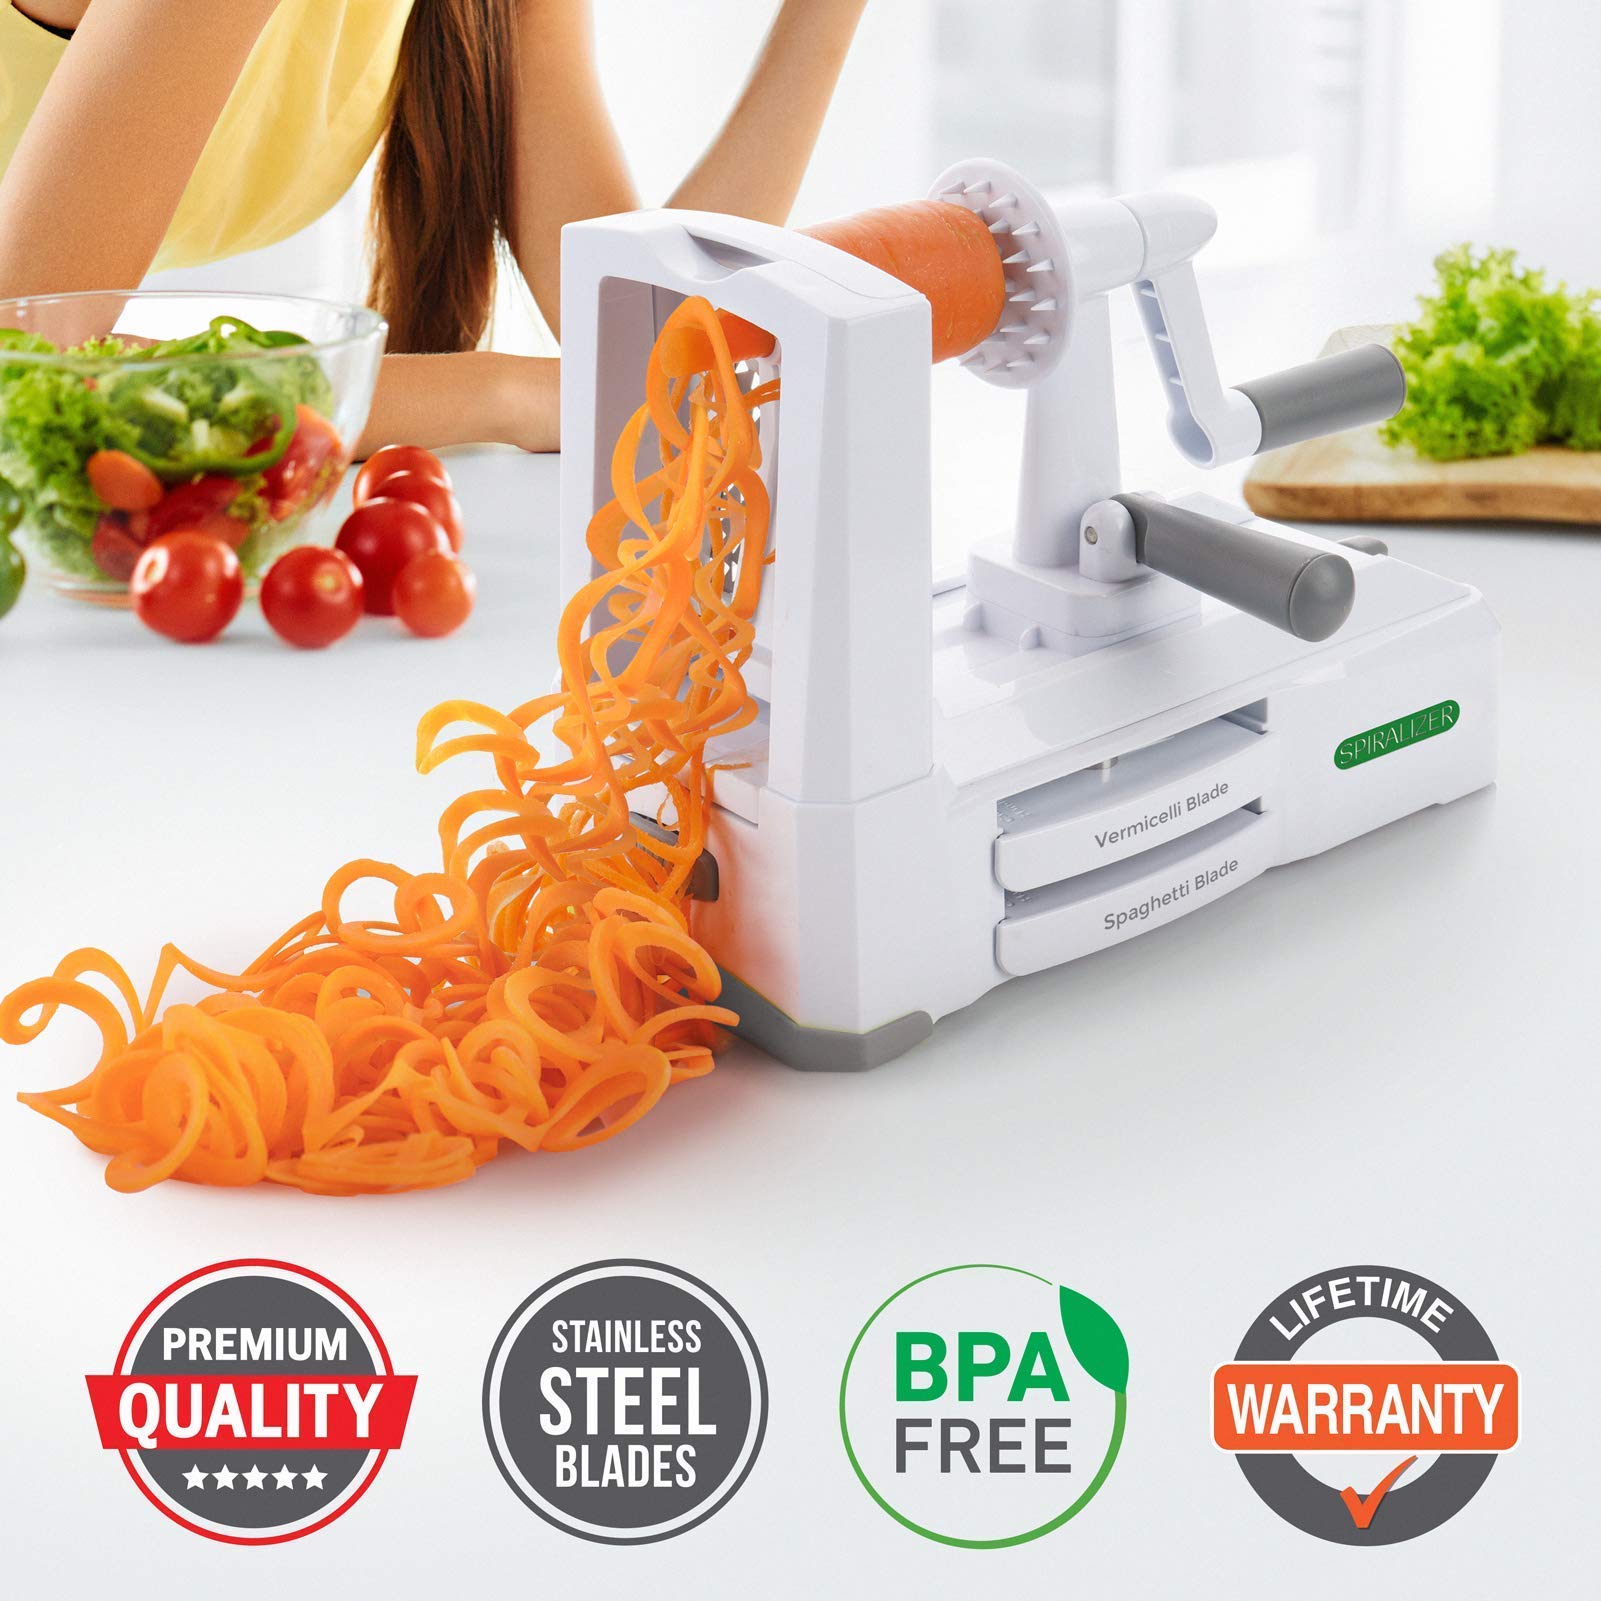 Spiralizer Ultimate 10 Strongest-and-Heaviest Duty Vegetable Slicer Best Veggie Pasta Spaghetti Maker for Keto/Paleo/Gluten-Free, With Extra Blade Caddy & 4 Recipe Ebook White